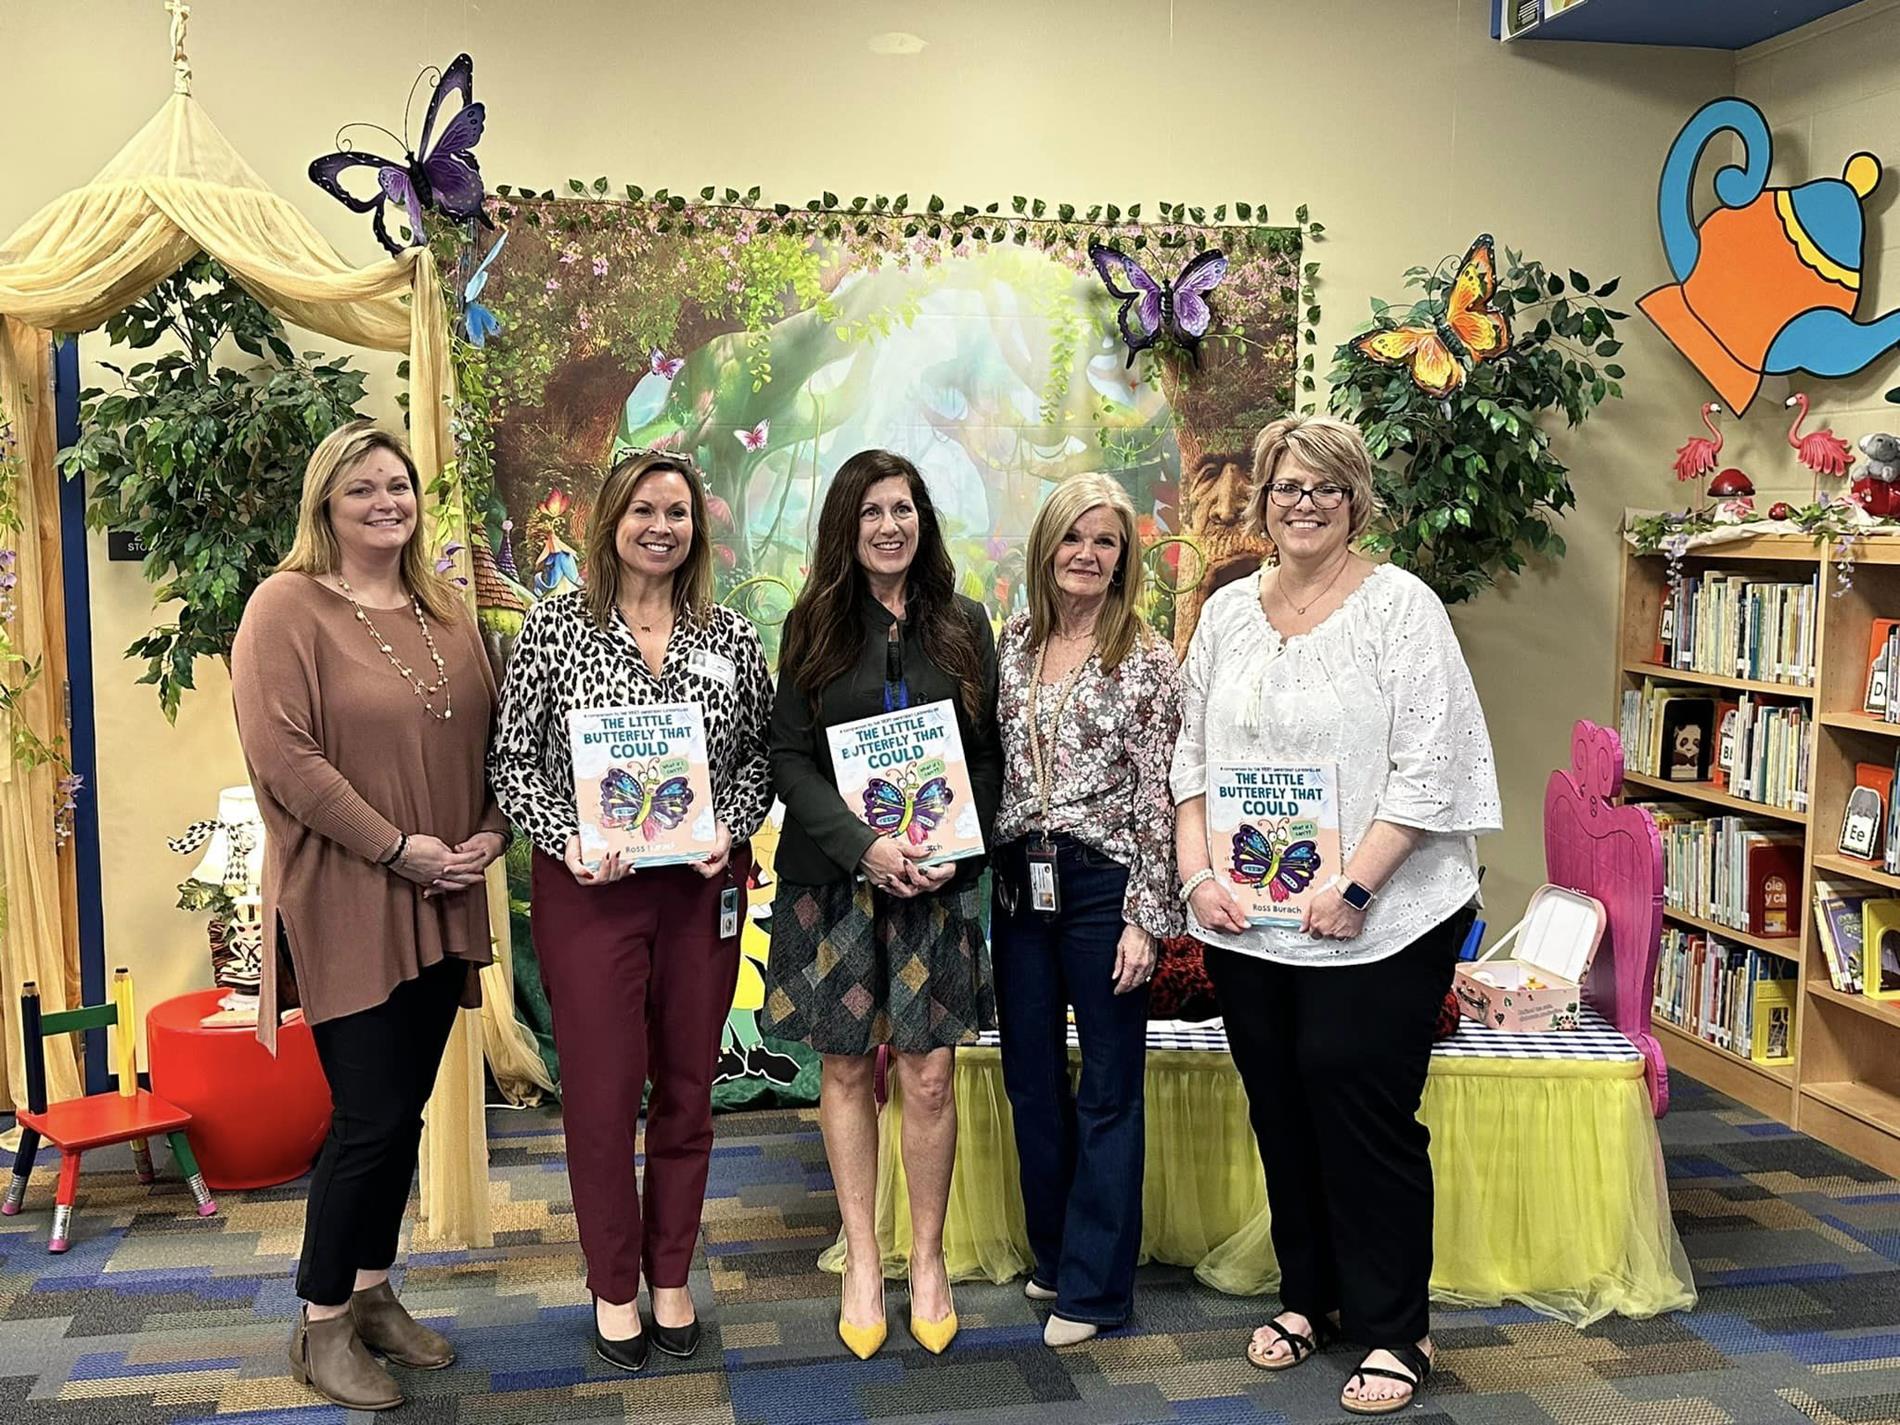 Chancellor of Early Learning visit, Cari Miller